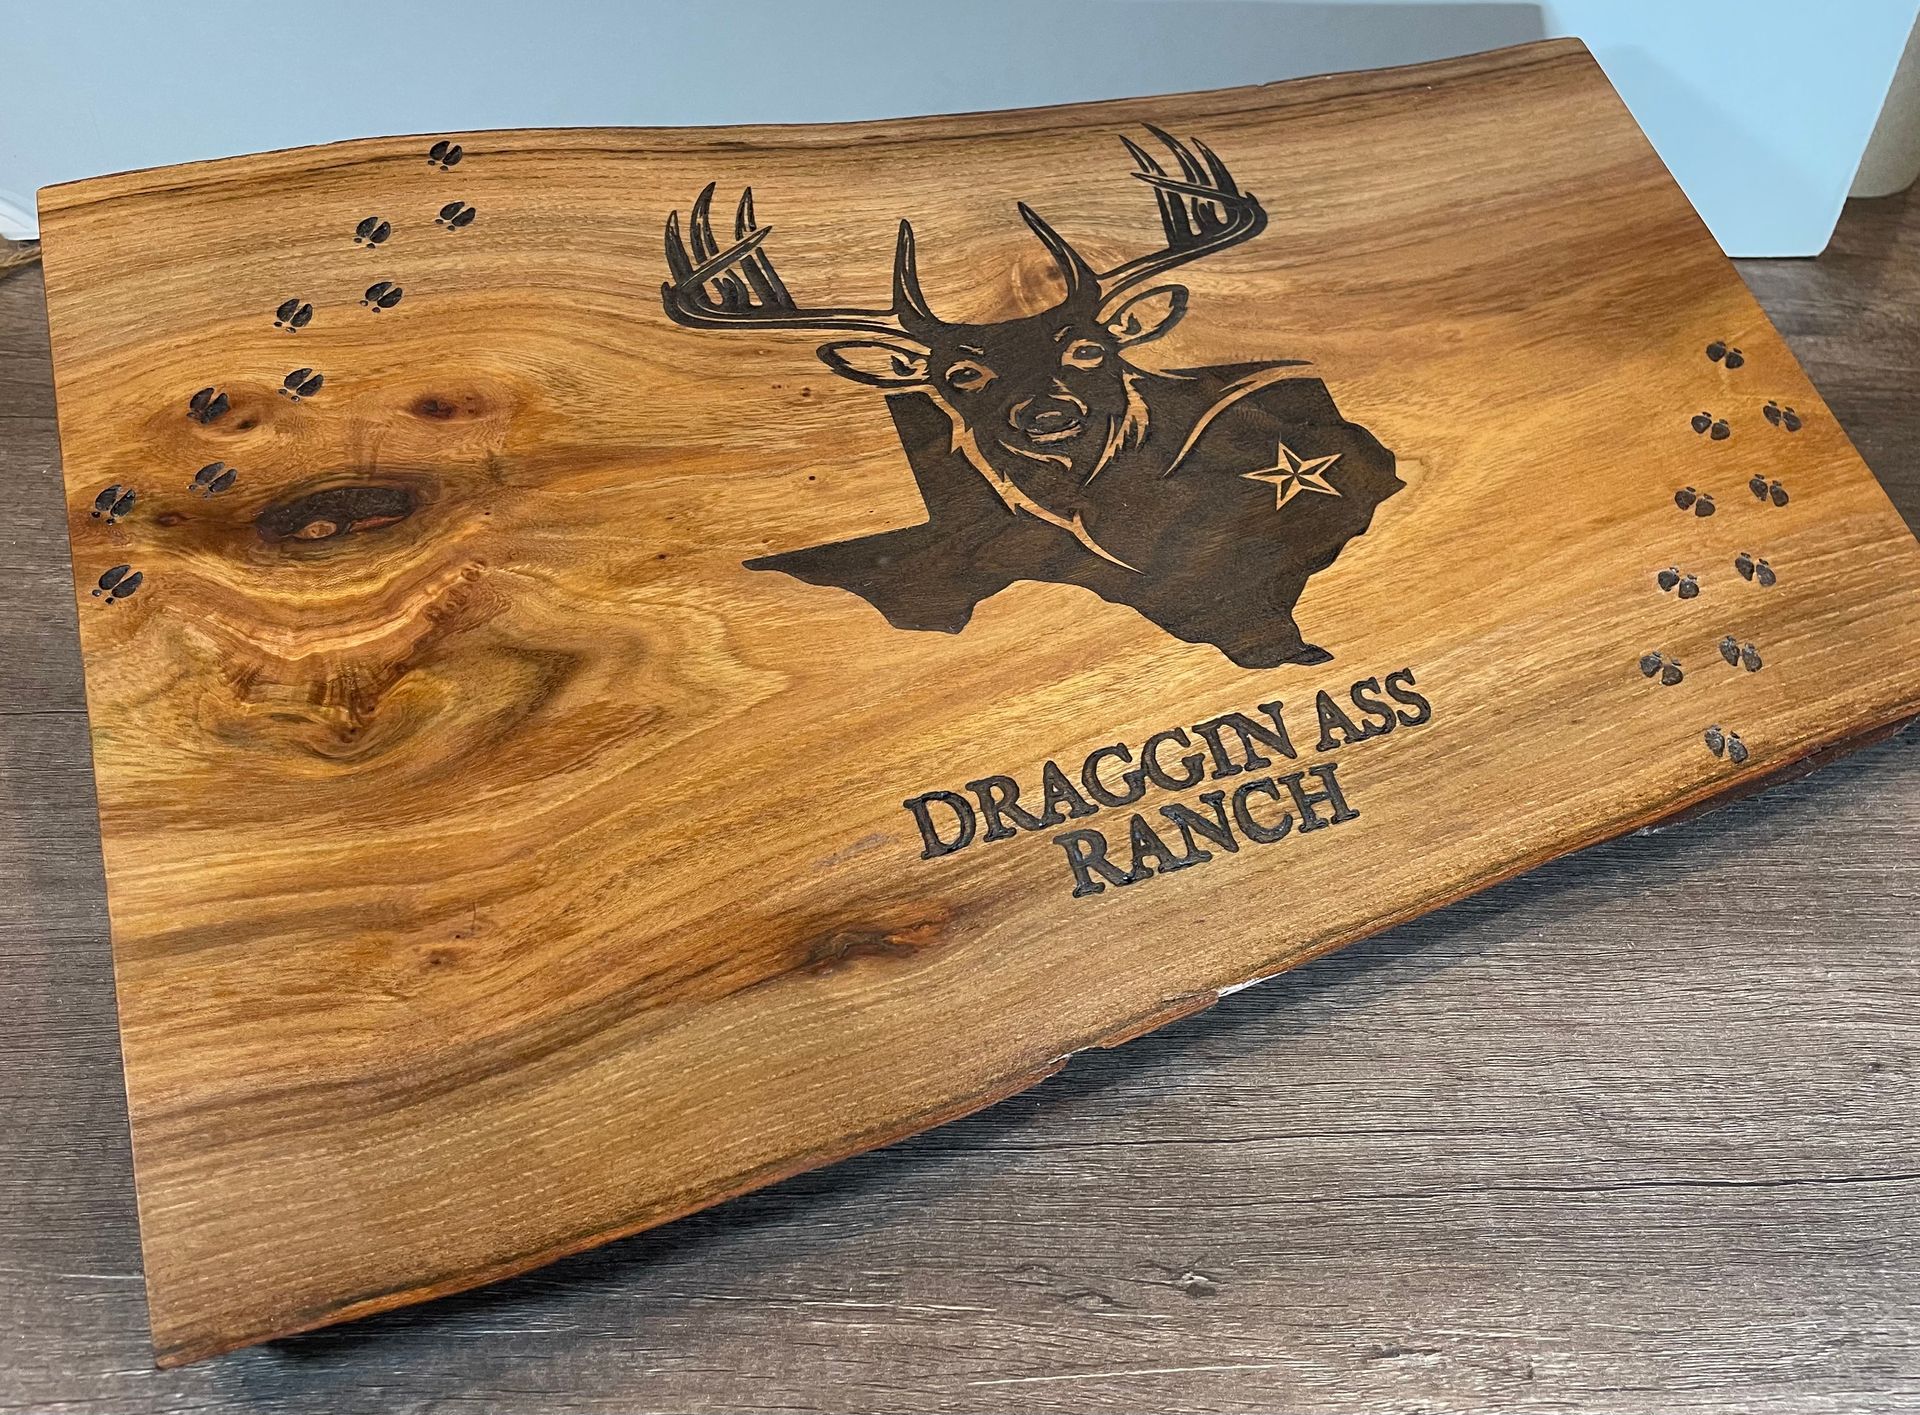 A wooden cutting board with a deer on it is sitting on a wooden table.